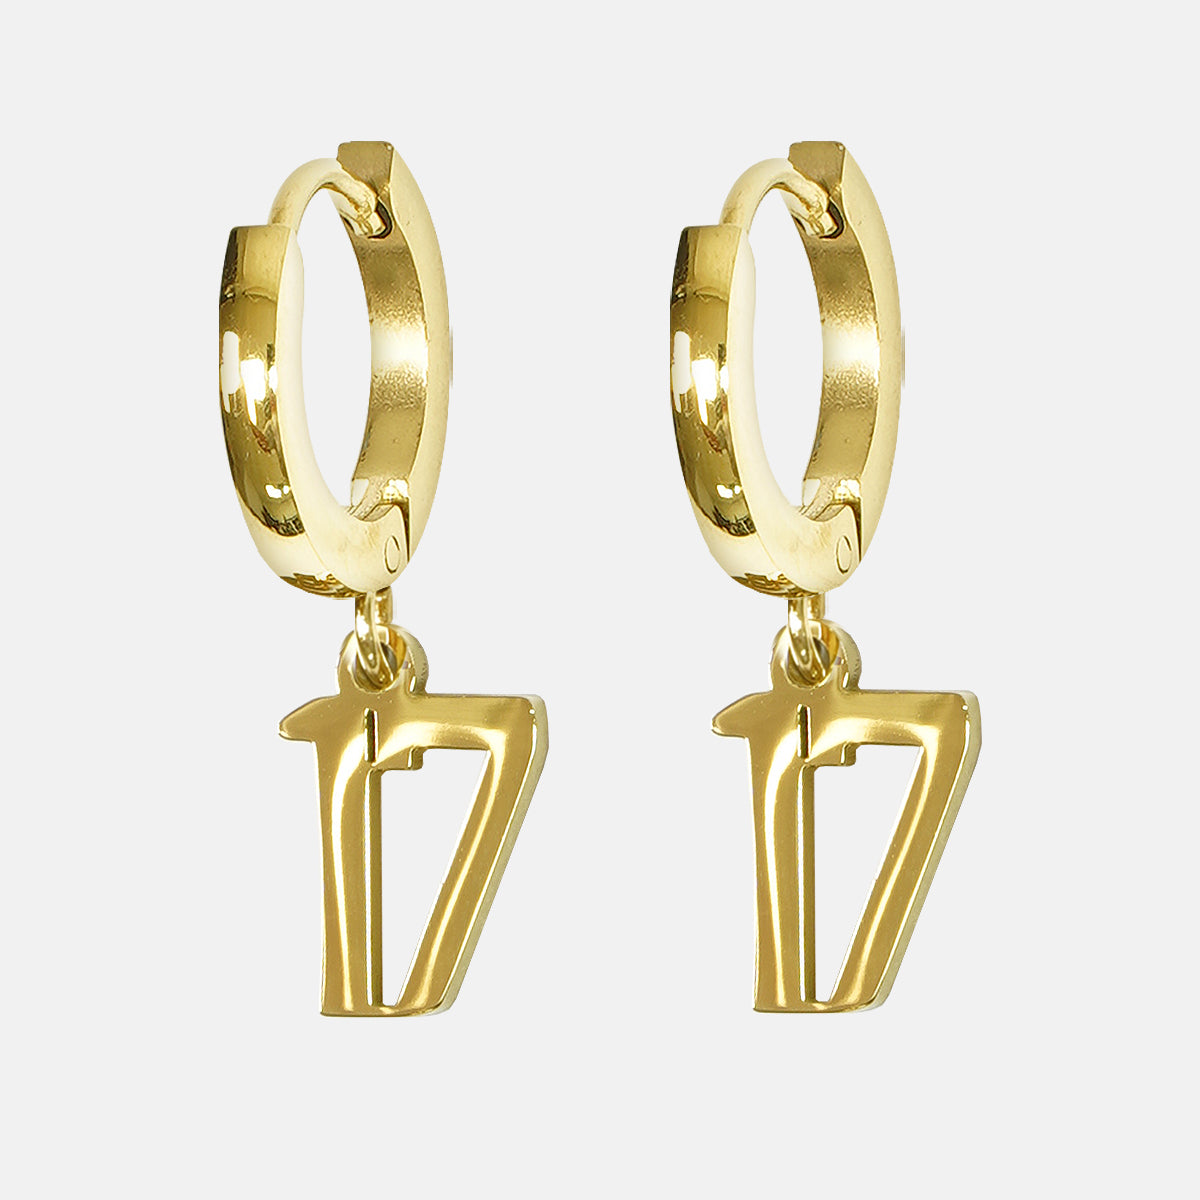 17 Number Earring - Gold Plated Stainless Steel